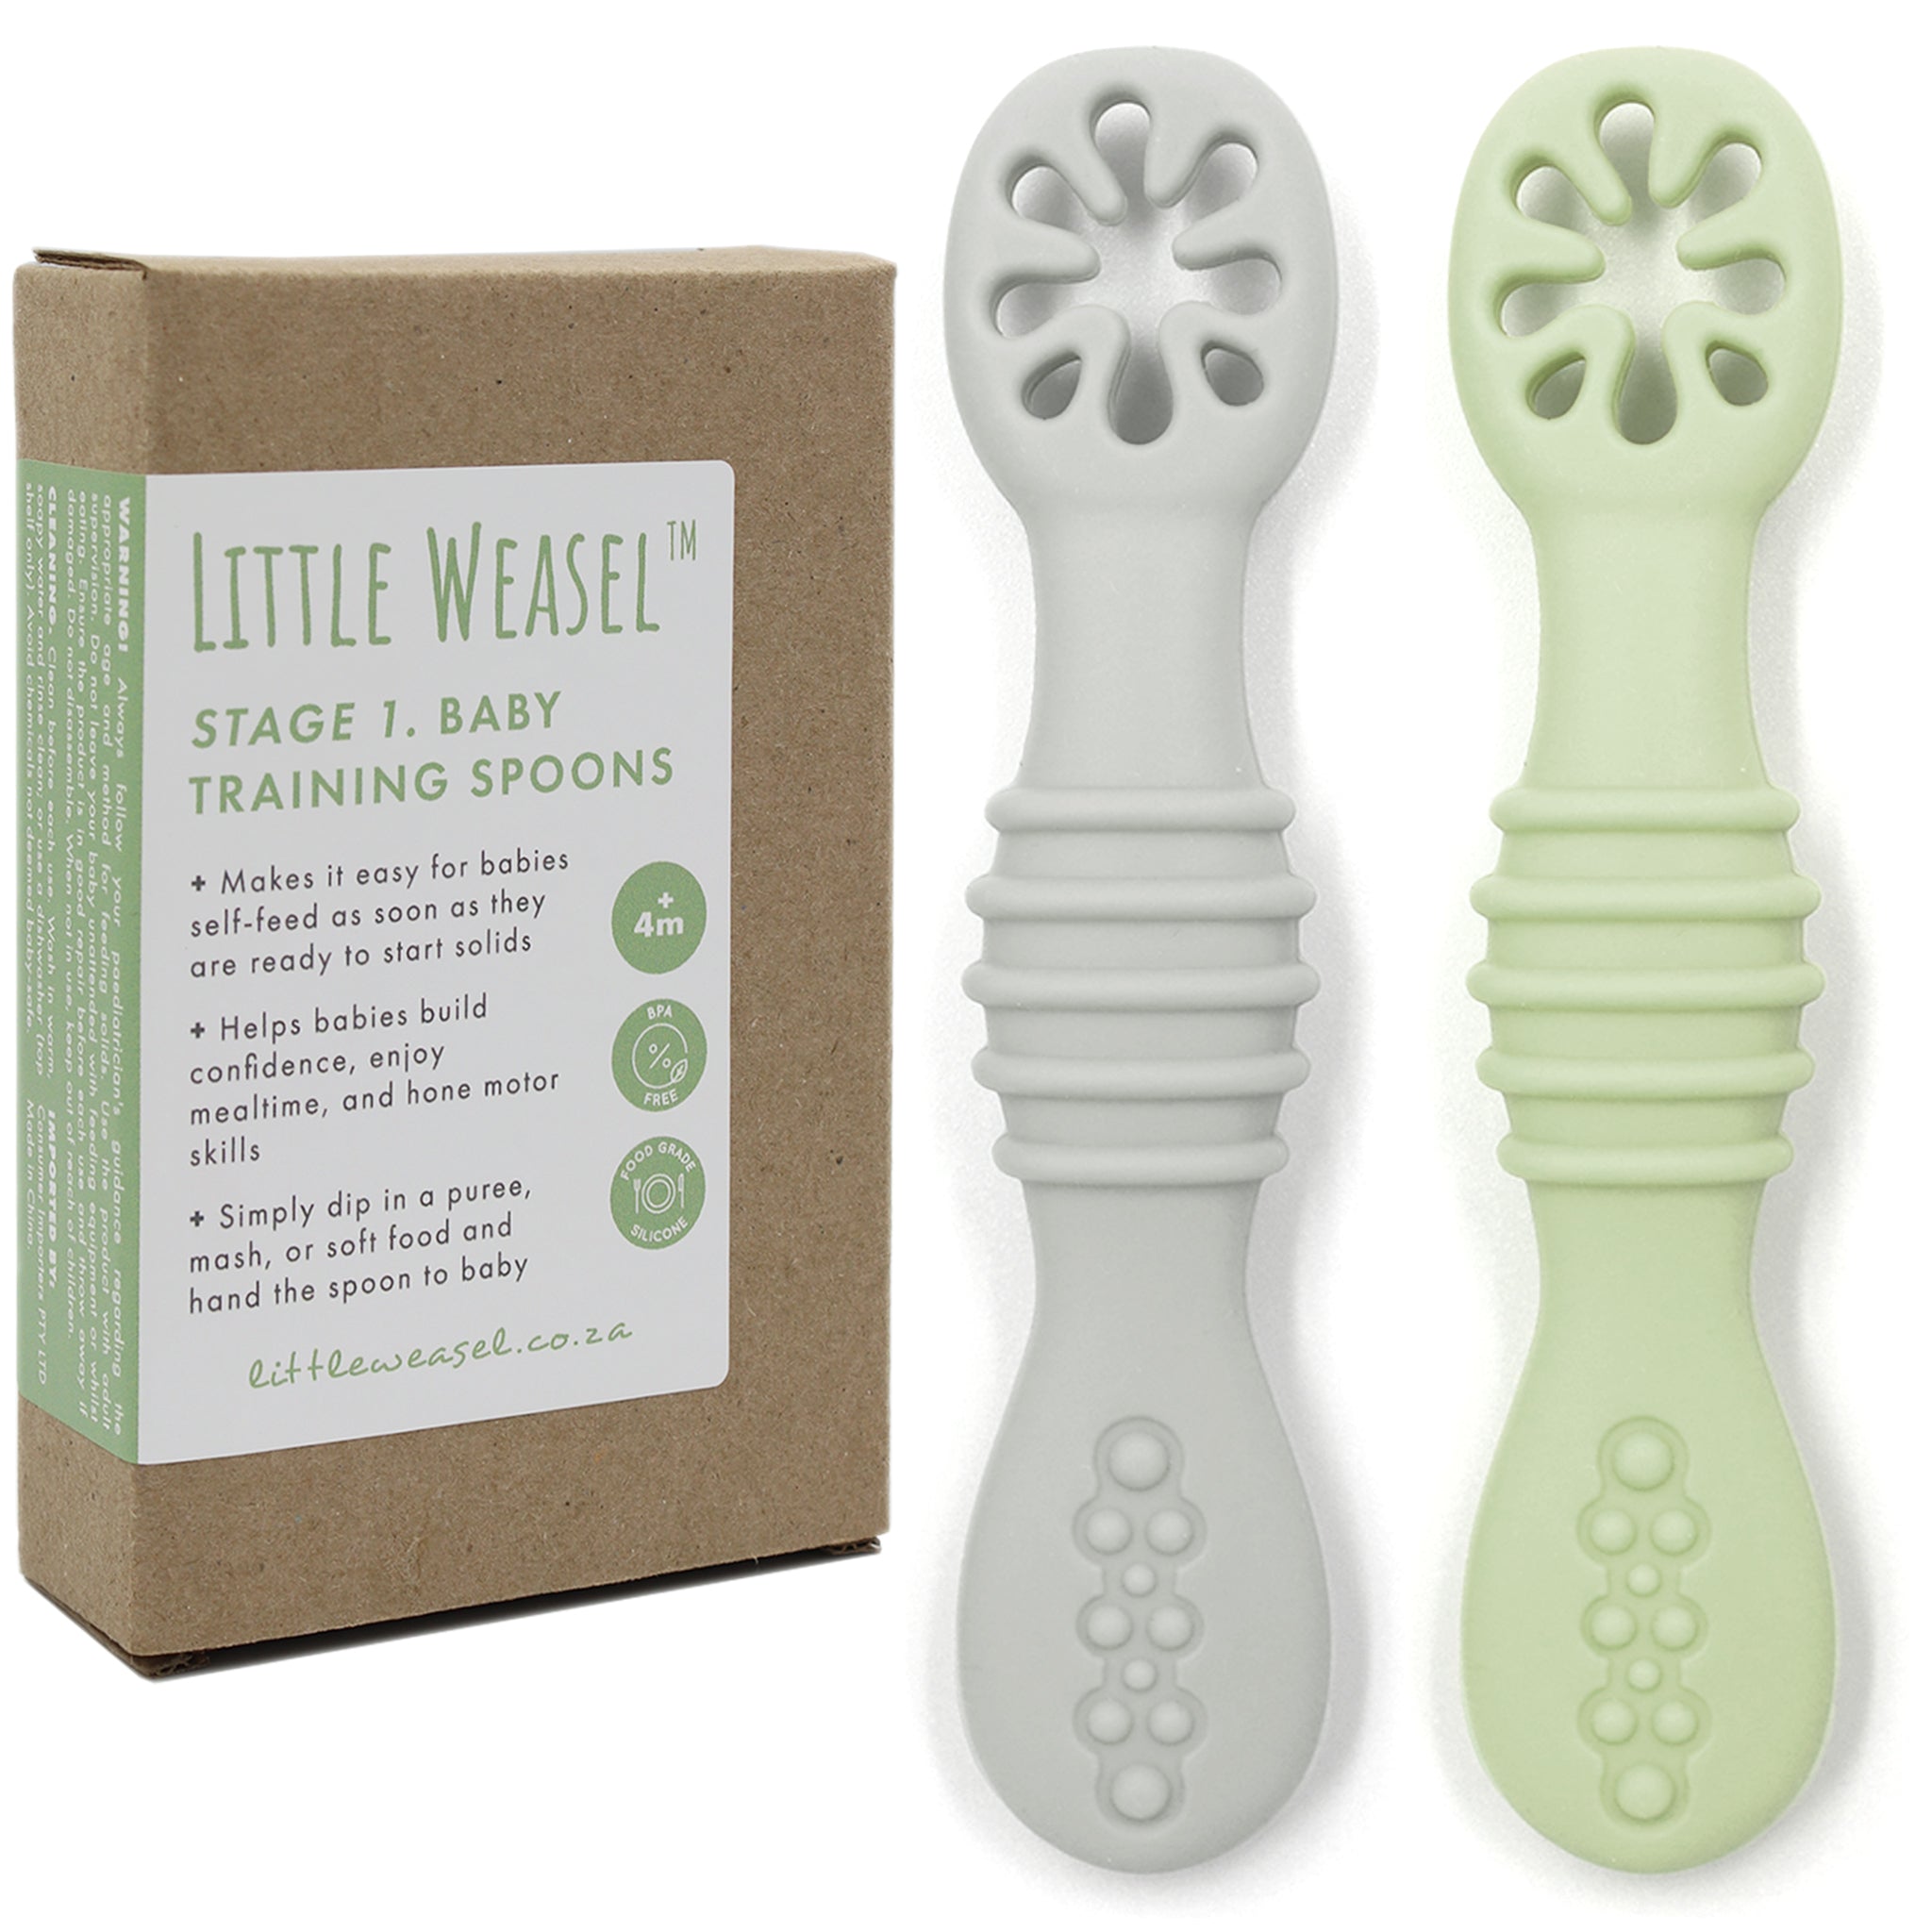 Stage 1 Baby Training Spoons for Self-Feeding – Little Weasel ZA